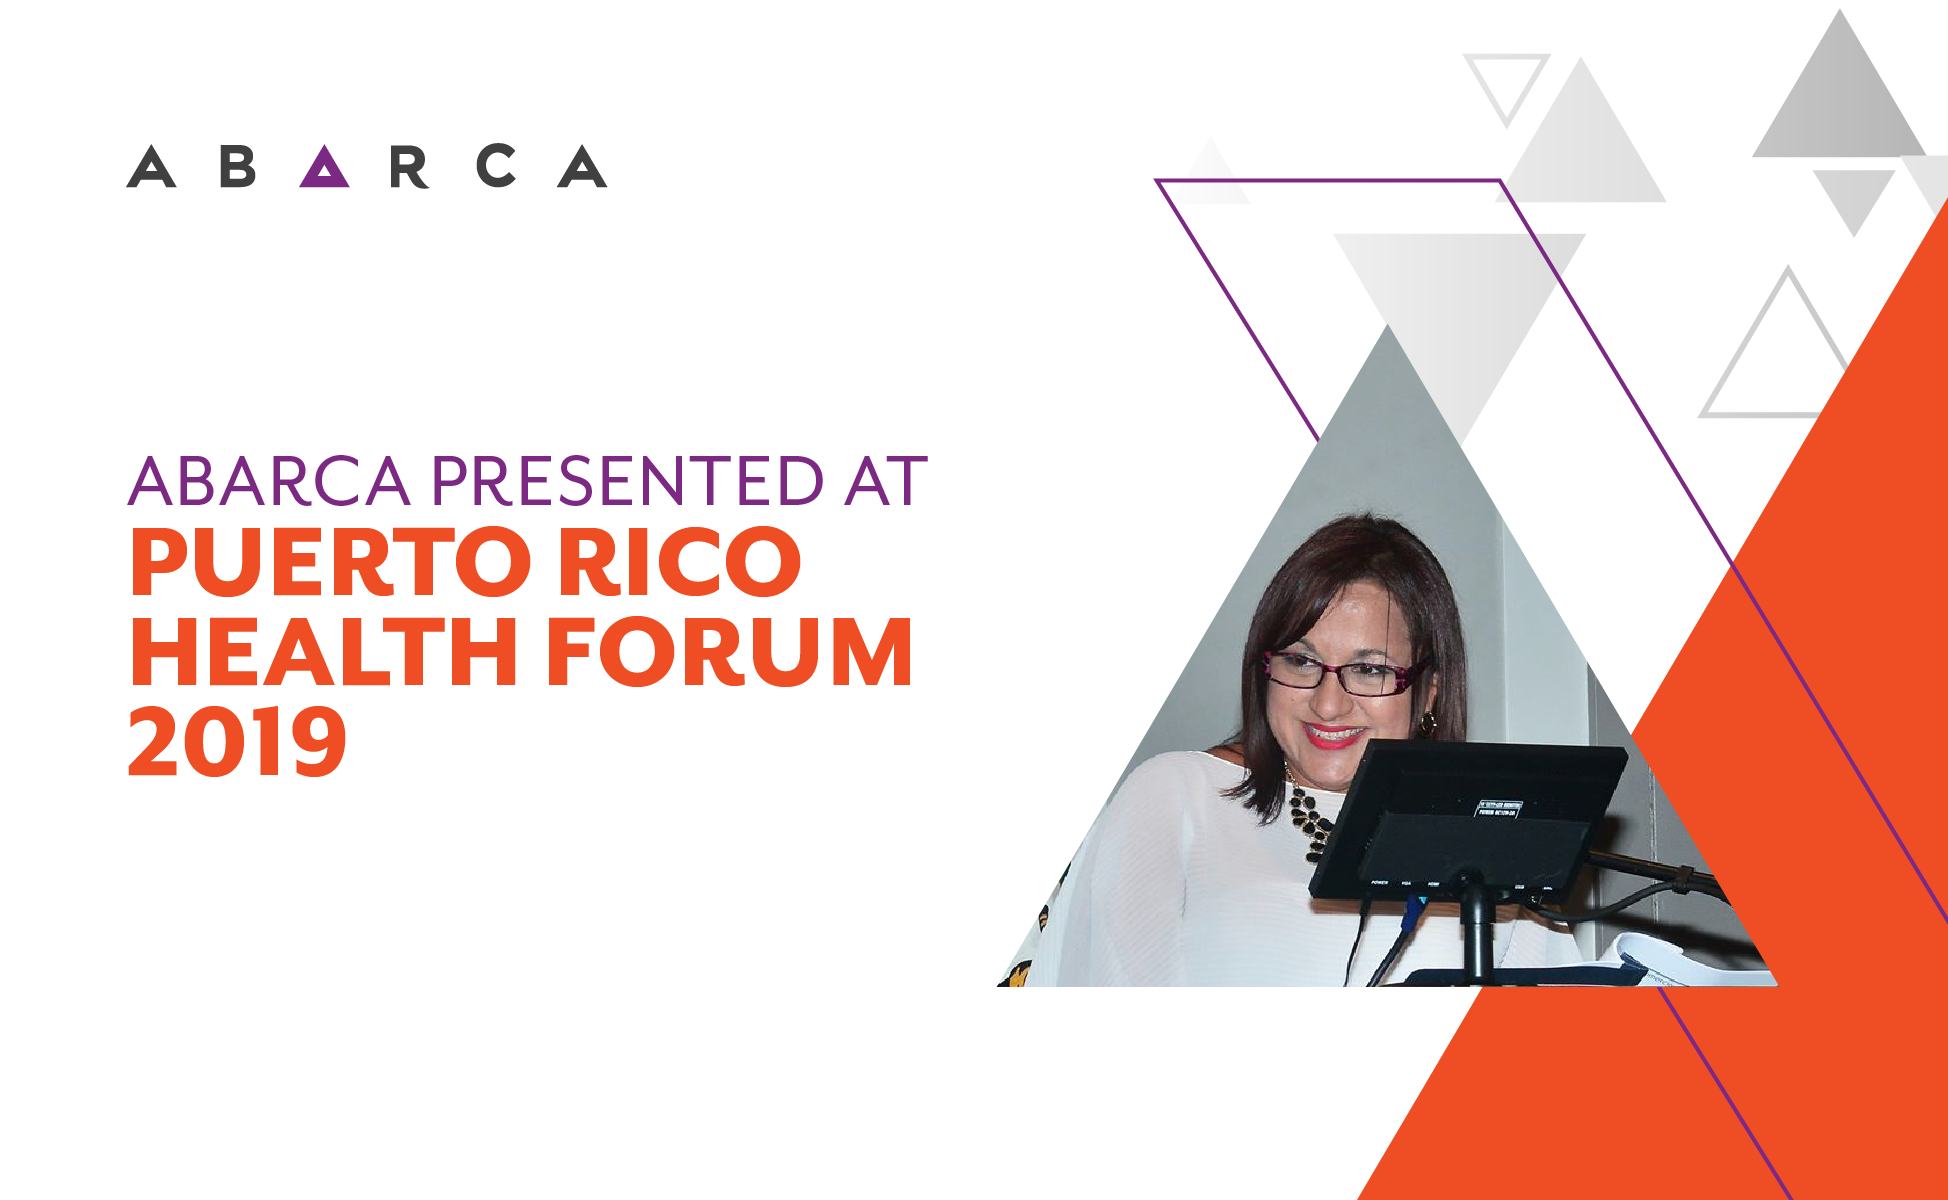 Abarca presented on Public Health Policy Trends at the 2019 Puerto Rico Health Forum